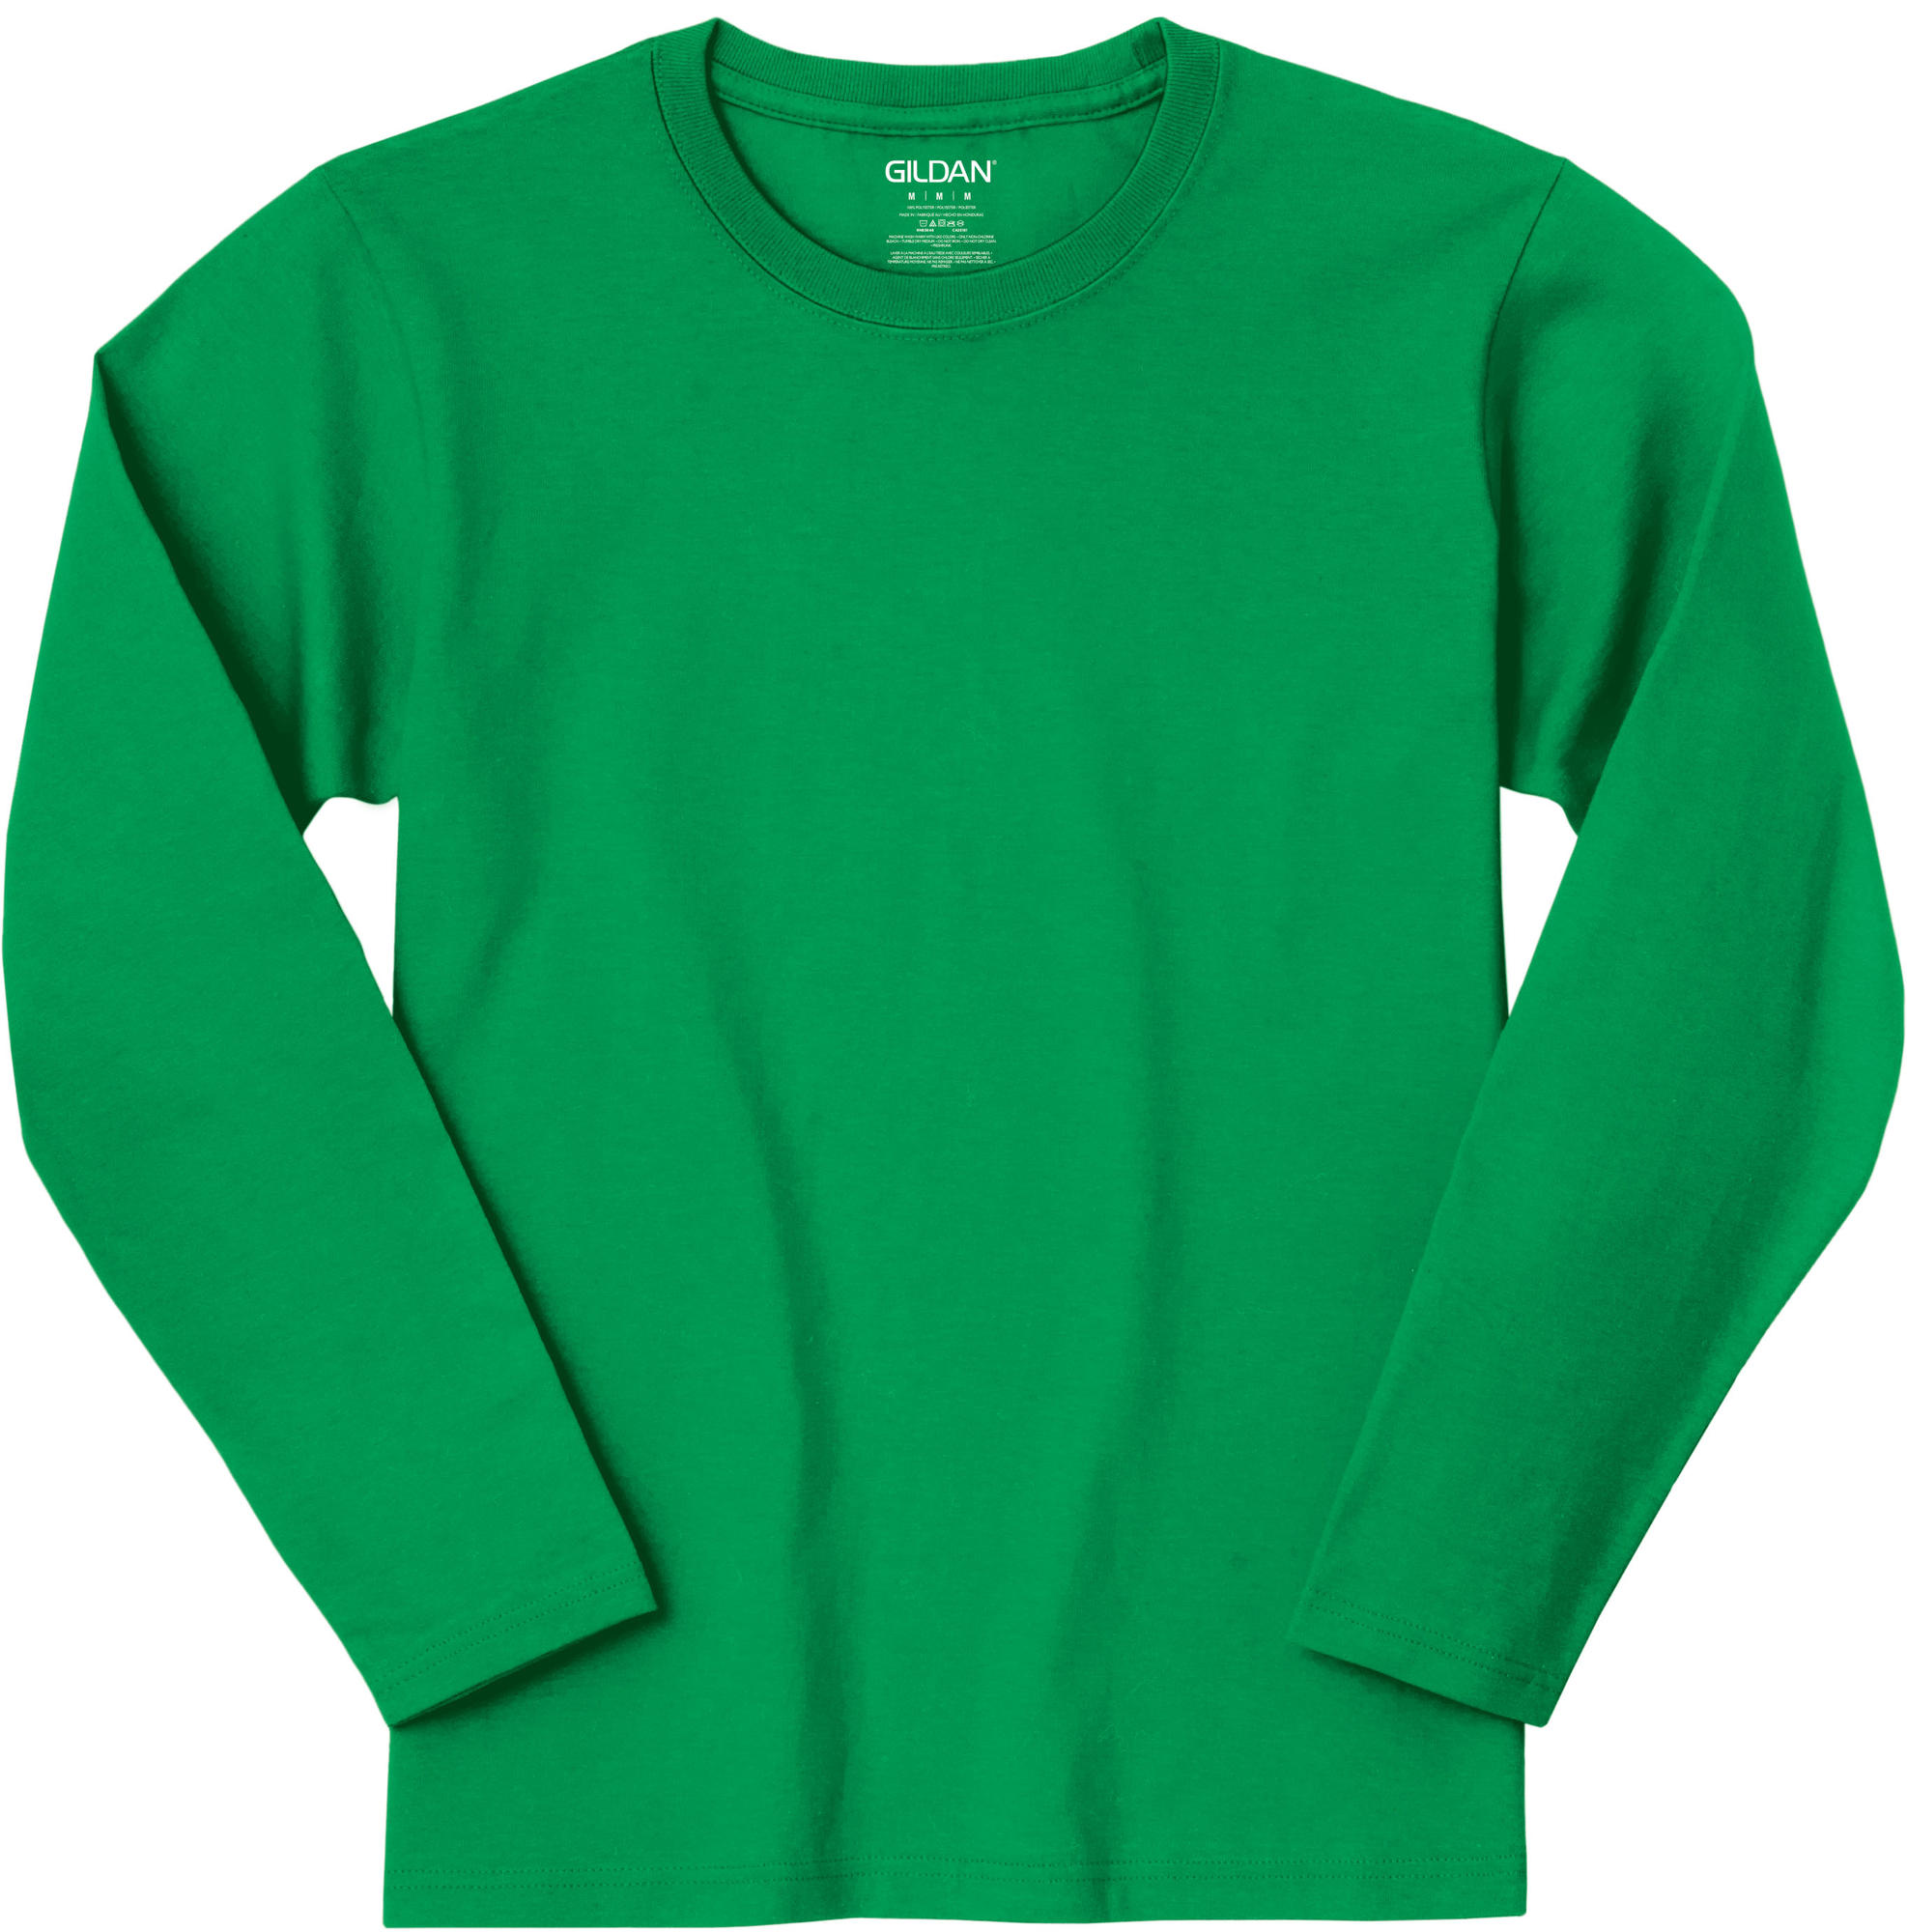 Shop for the Gildan® Long Sleeve Crew Neck Adult T-Shirt at Michaels